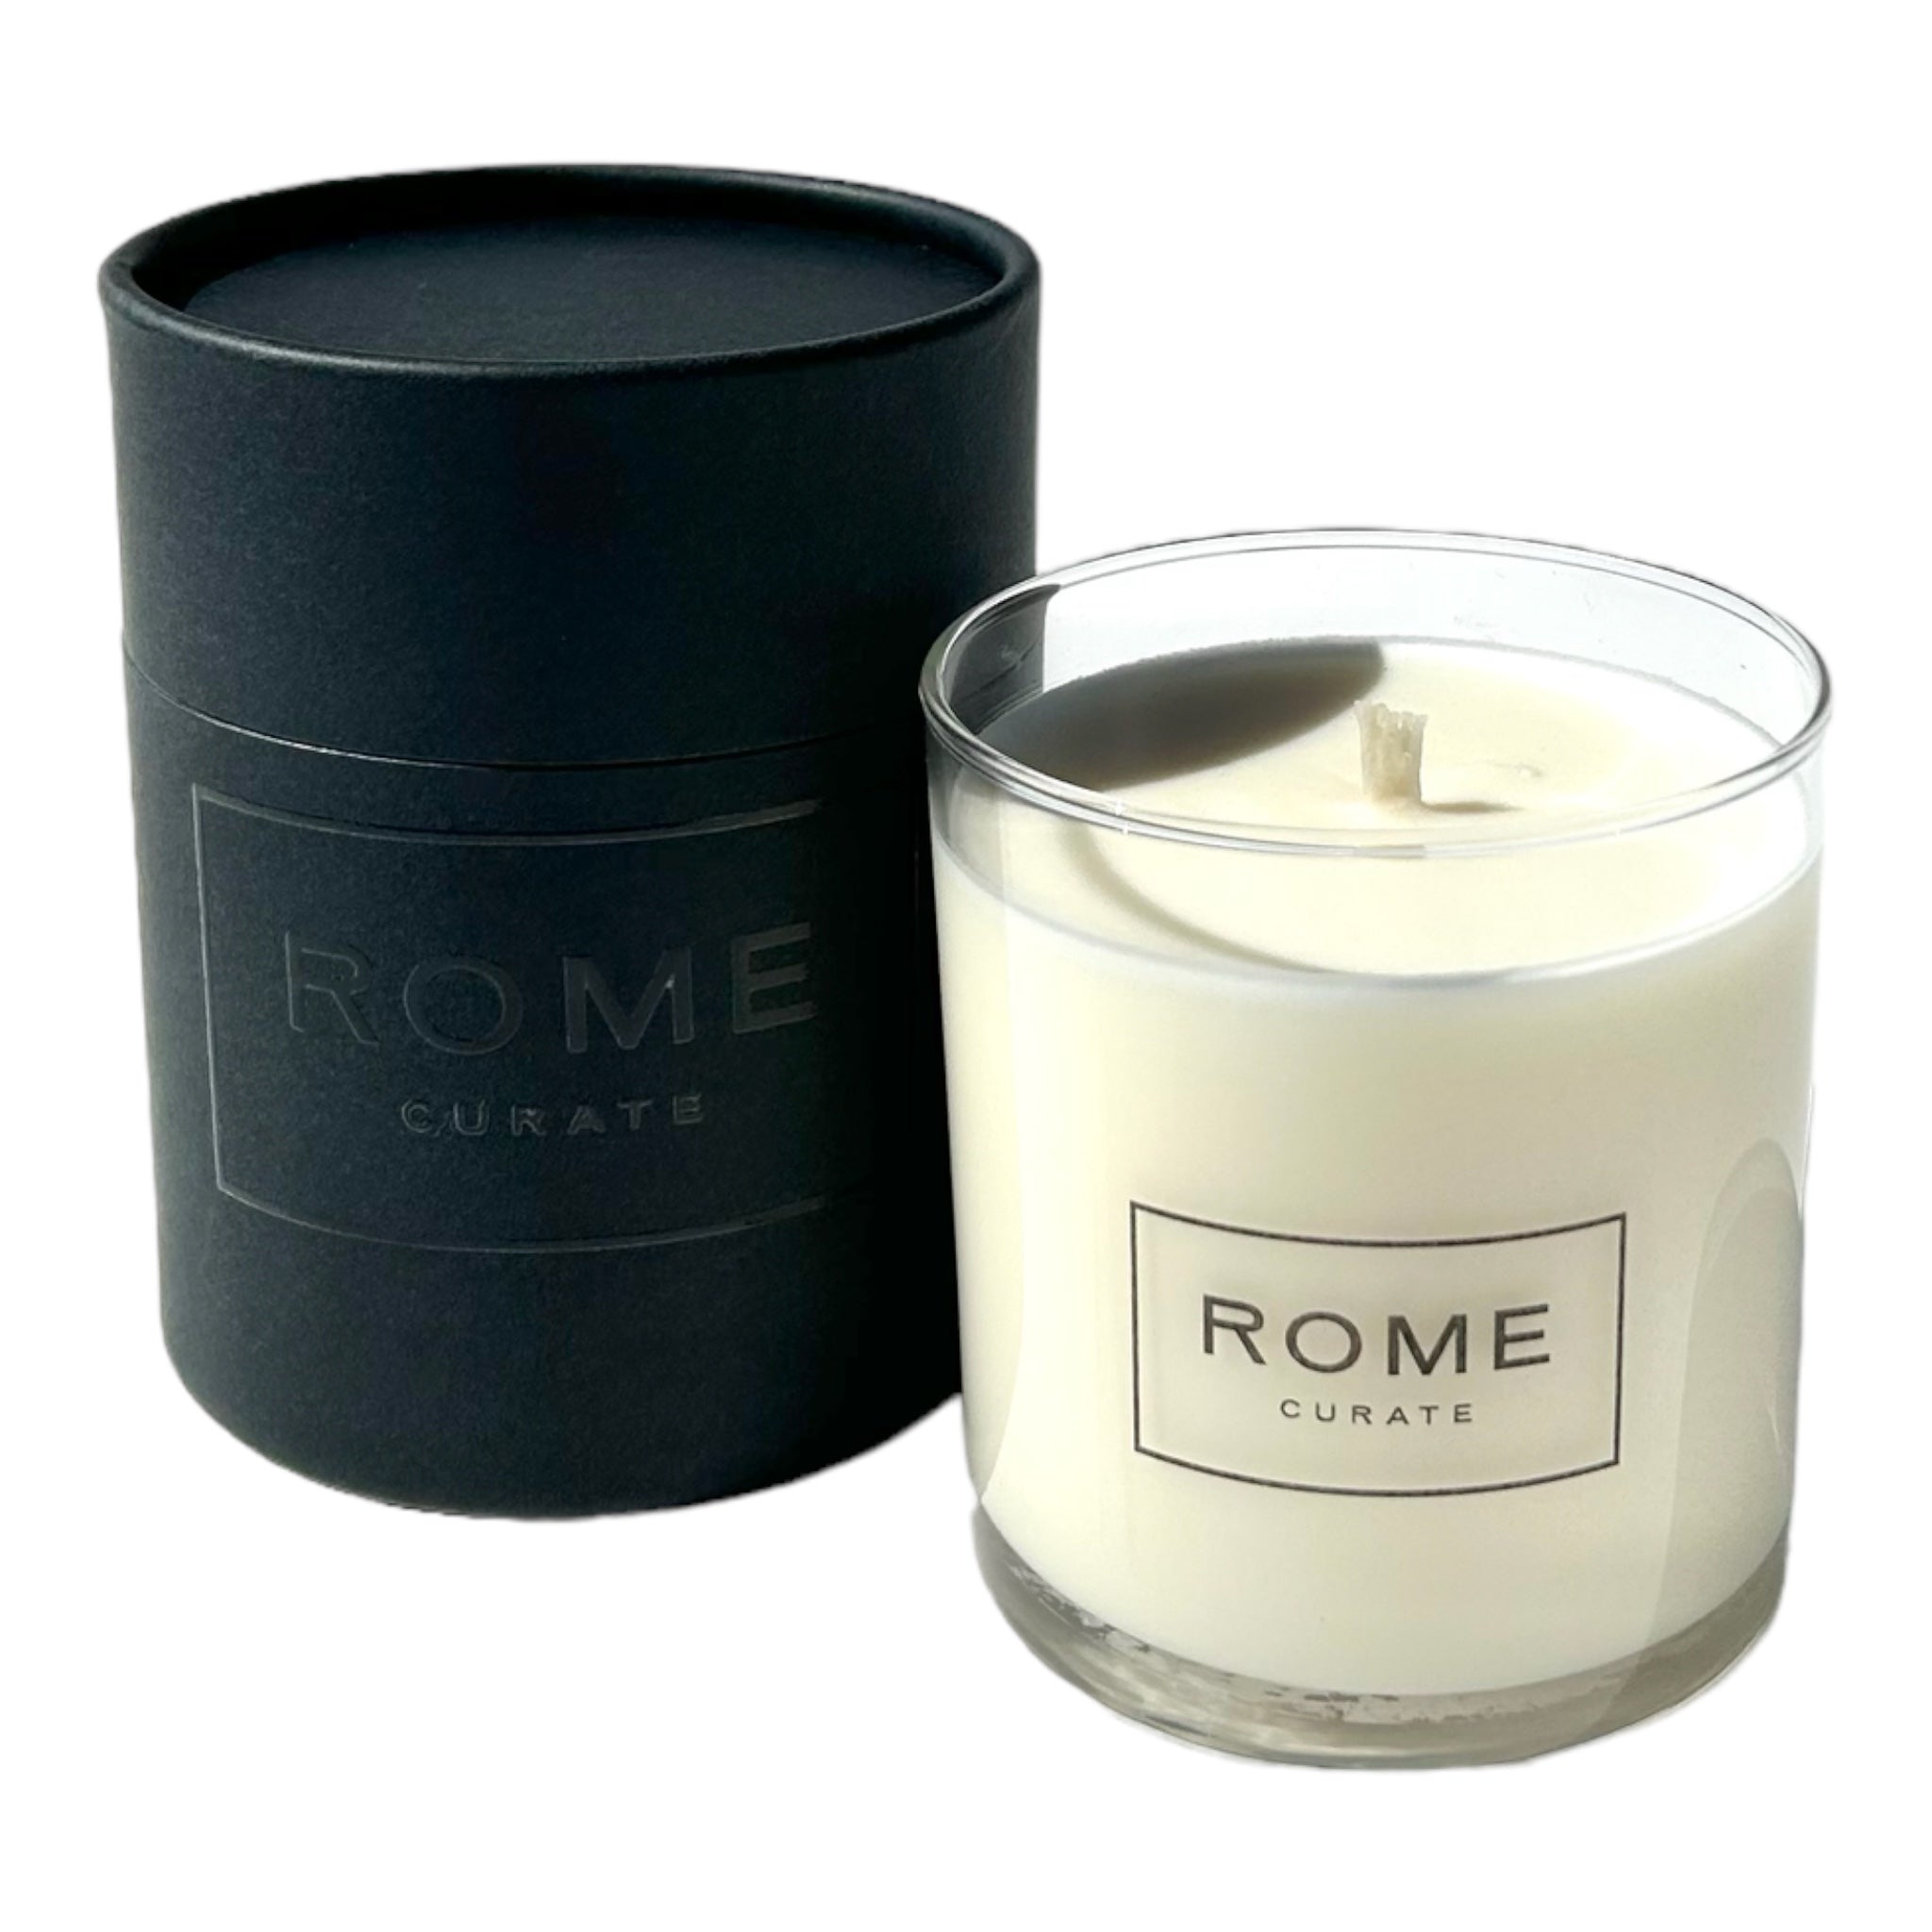 French 75 is a sweet and fragrant scented soy candle